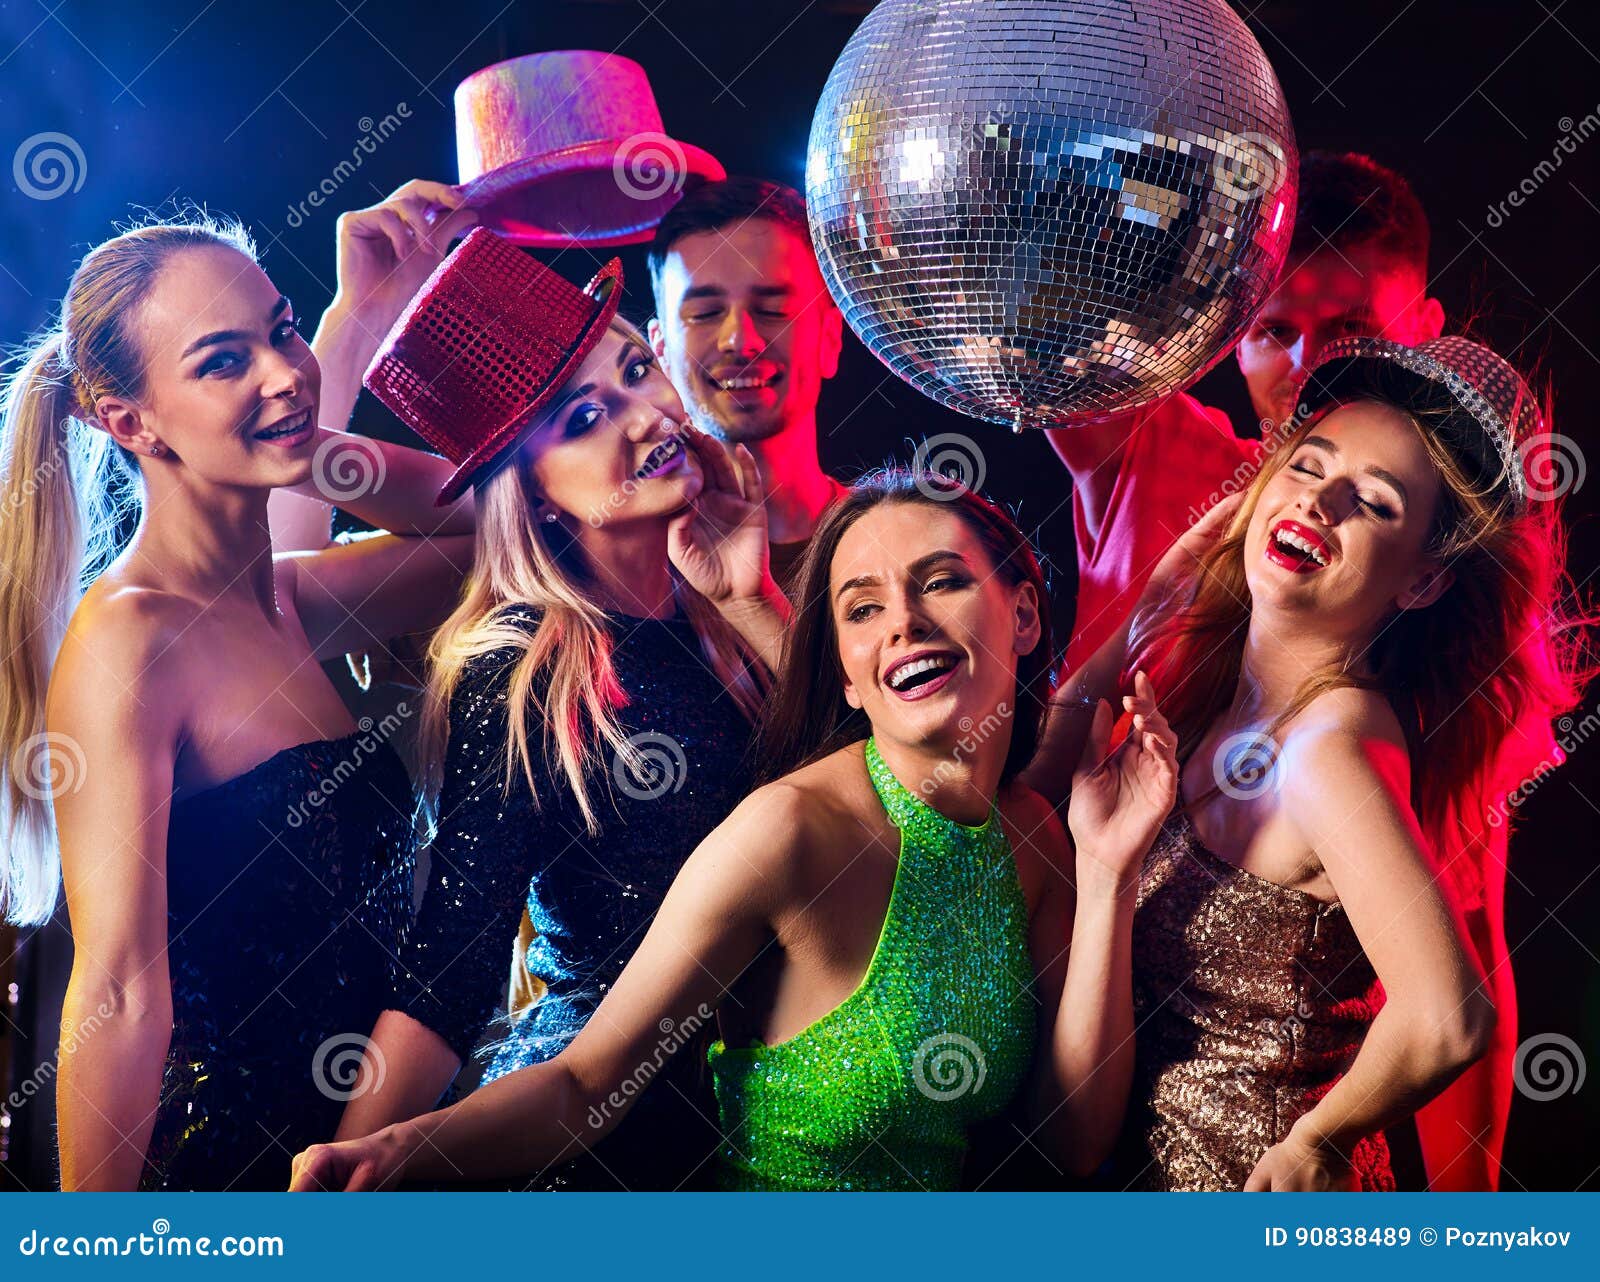 Dance Party with Group People Dancing and Disco Ball. Stock Image ...